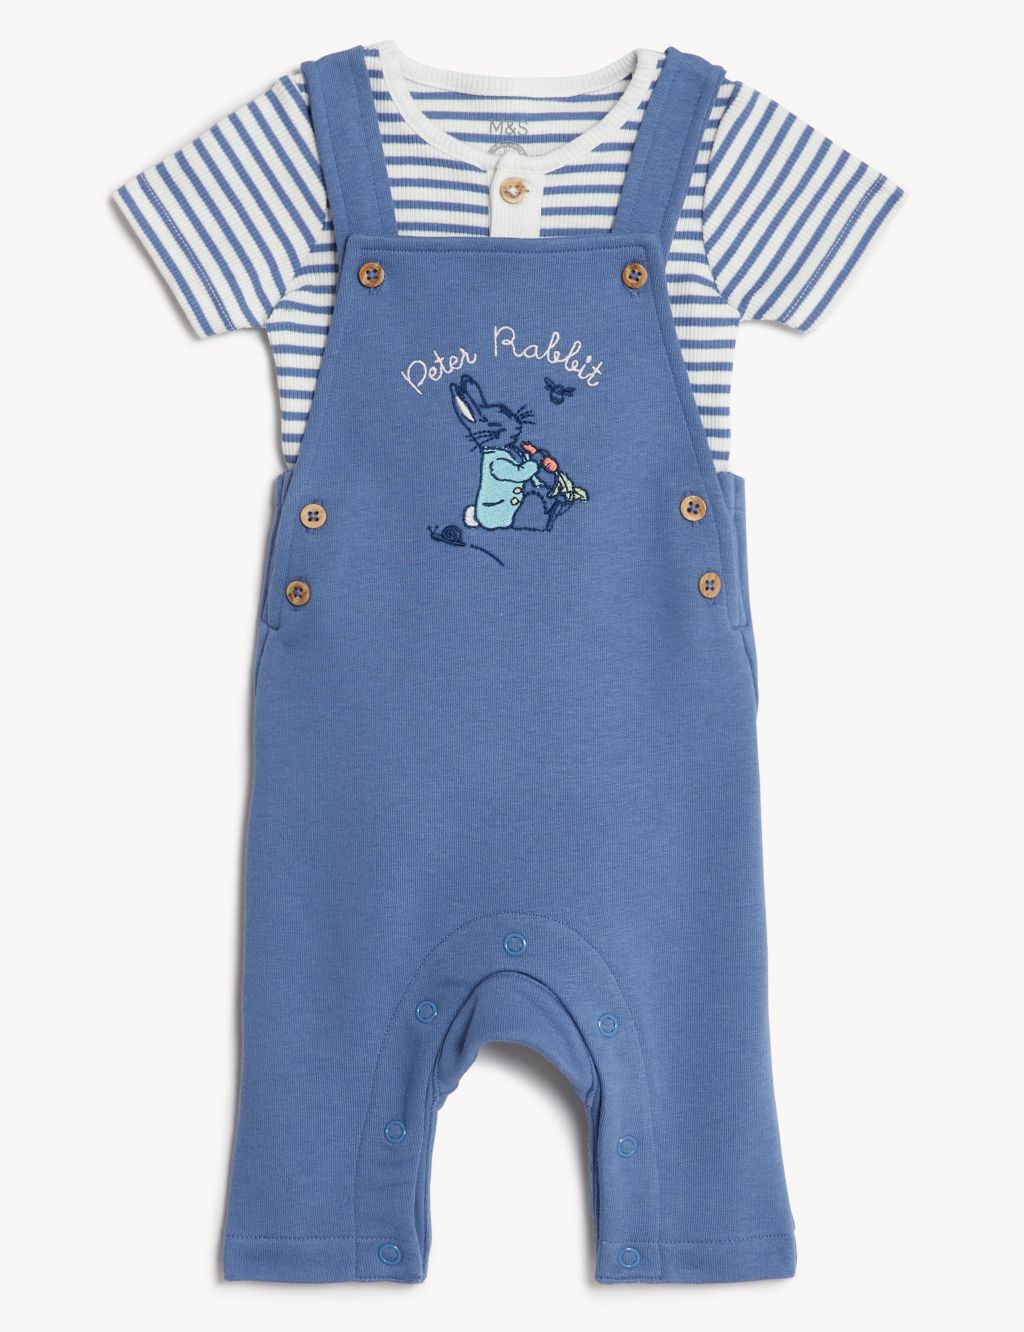 2pc Cotton Rich Peter Rabbit™ Outfit (0-3 yrs) image 1